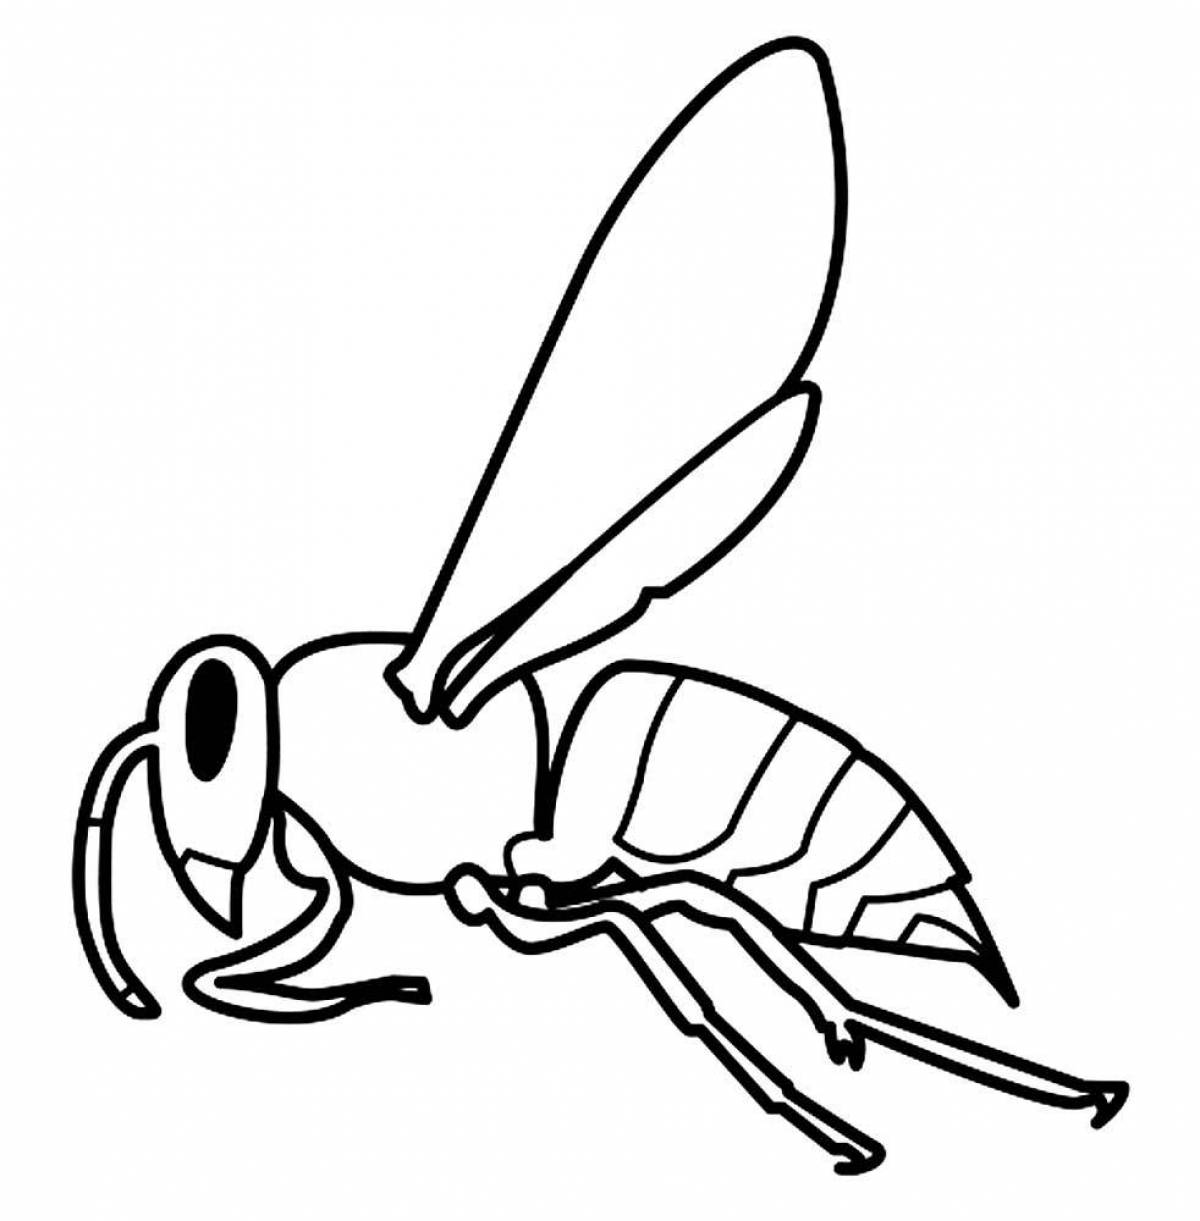 Fat wasp coloring page